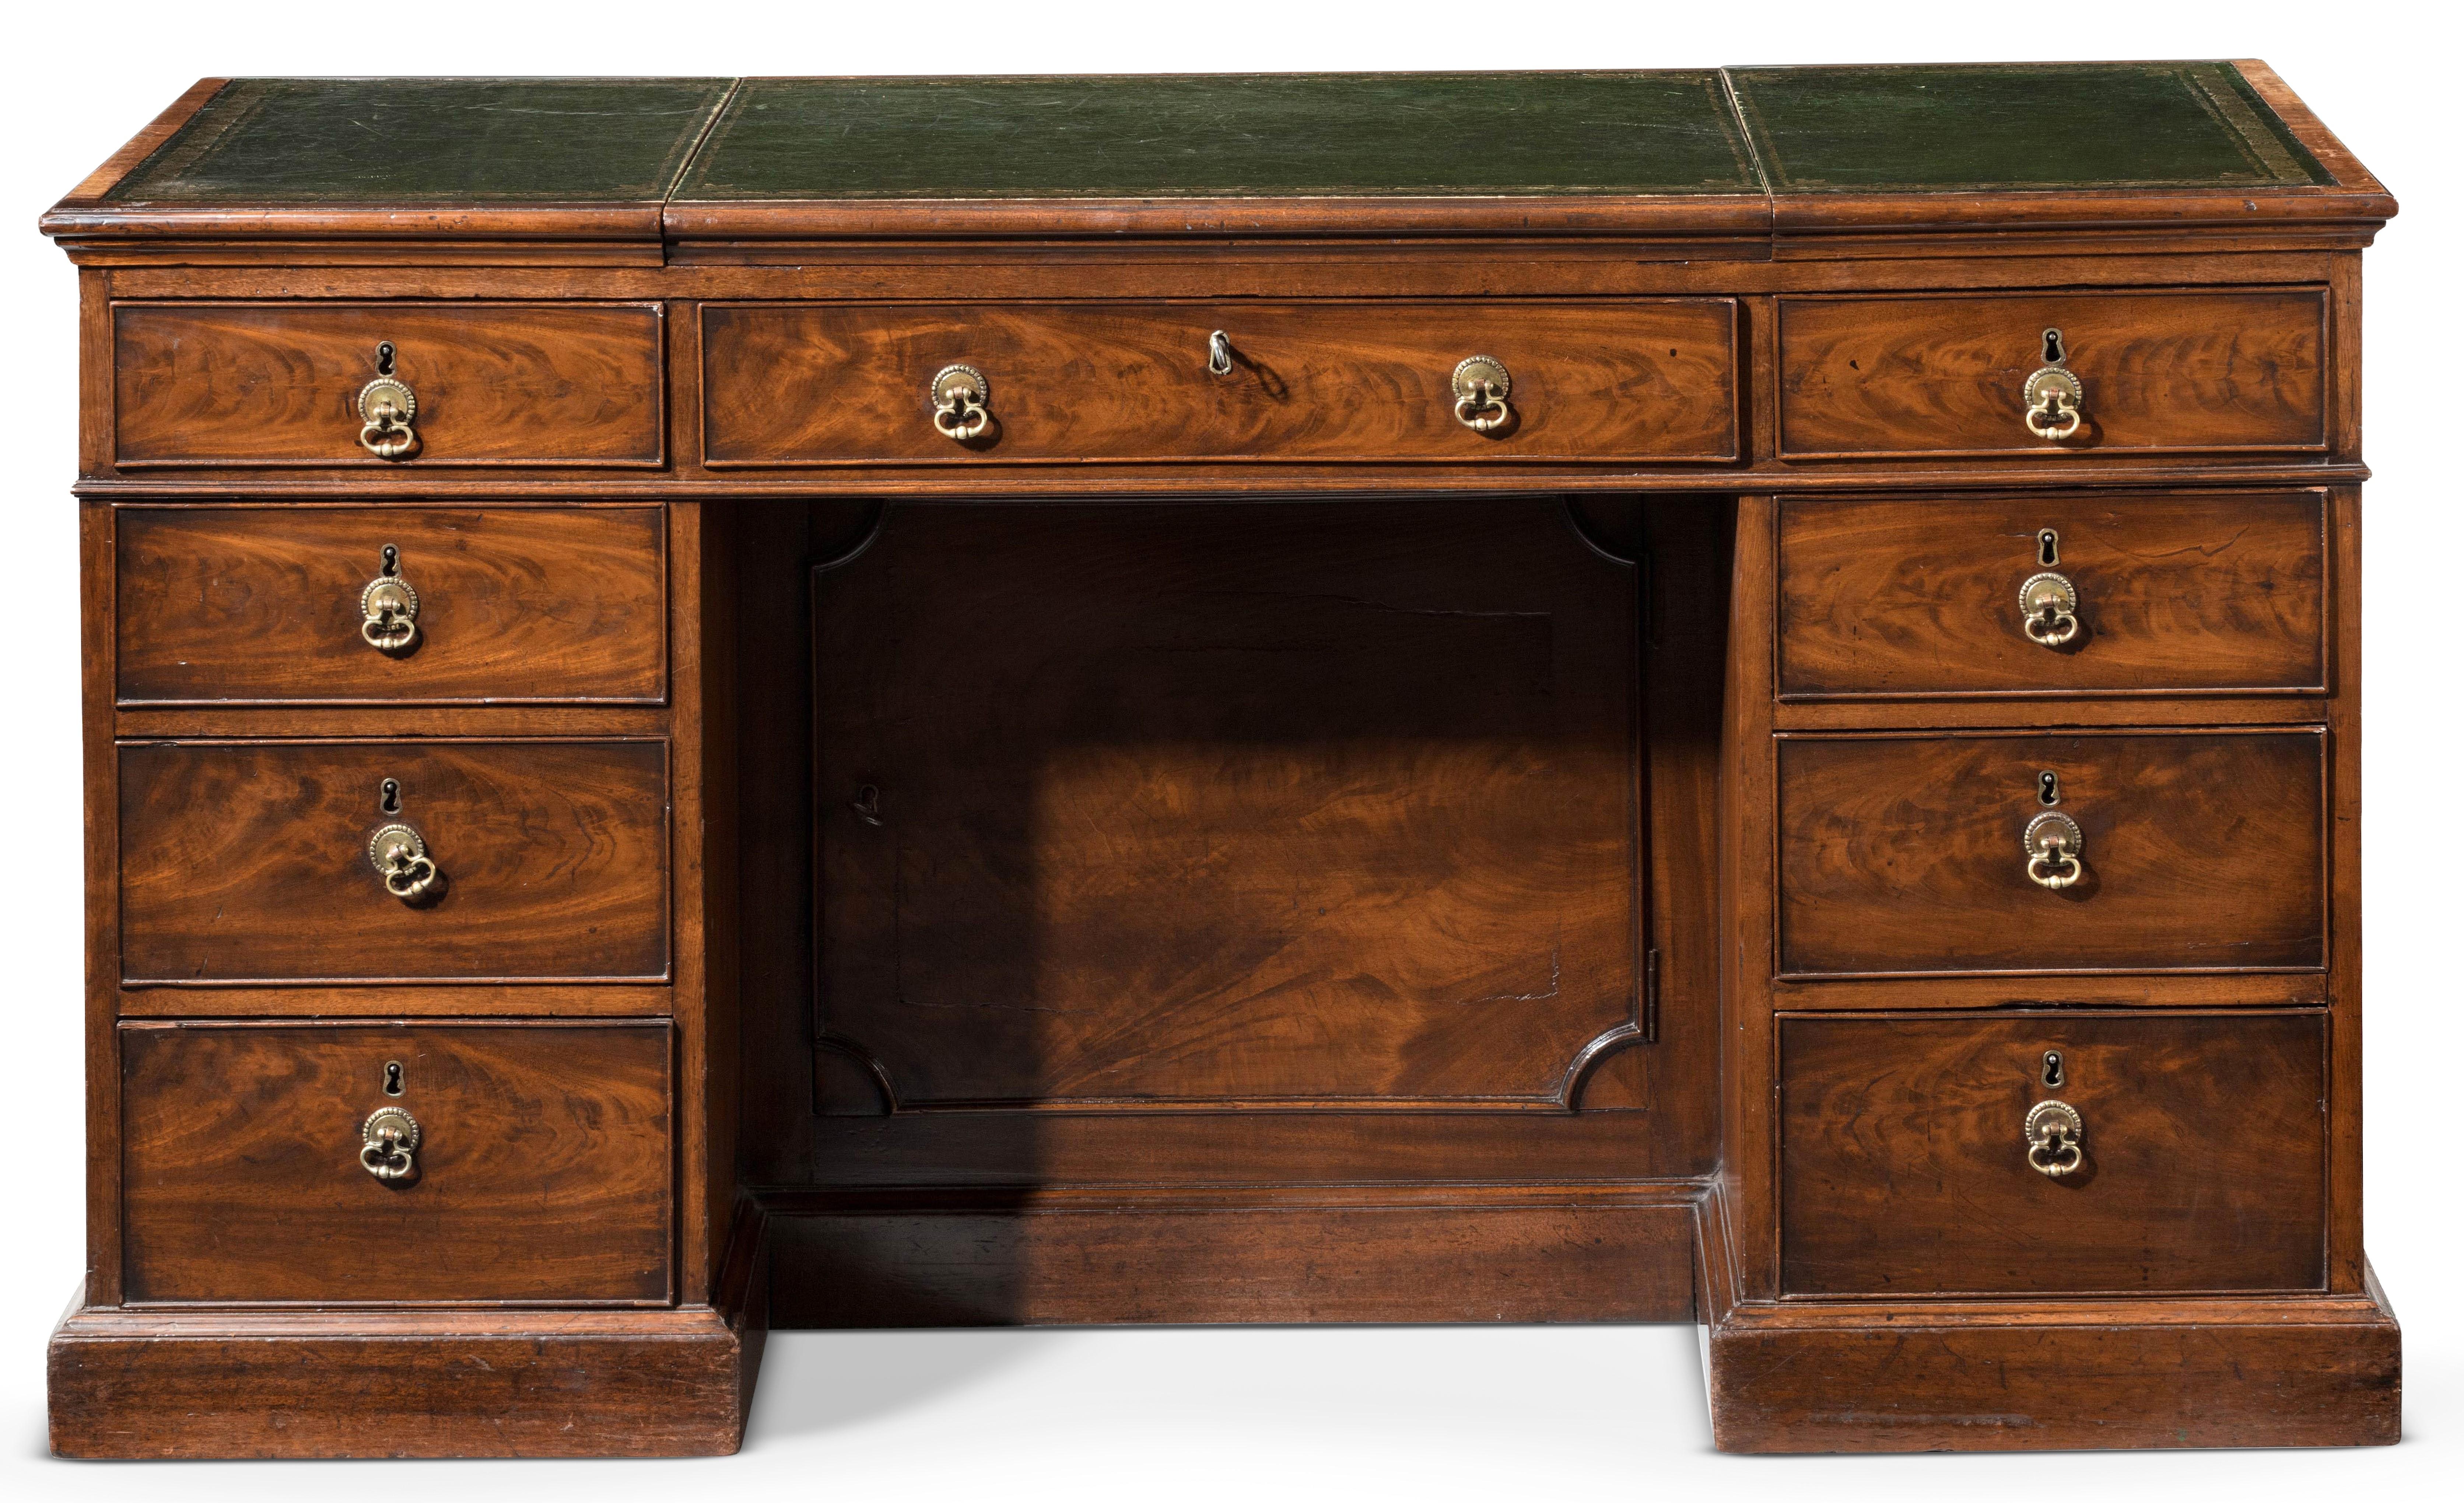 A Superbly made George III Chippendale Period Mahogany Writing Desk
The rectangular leather inset top with a cross-banded moulded edge,
and a lift up central panel, above three freeze drawers, support by three drawers on each side, with panelled